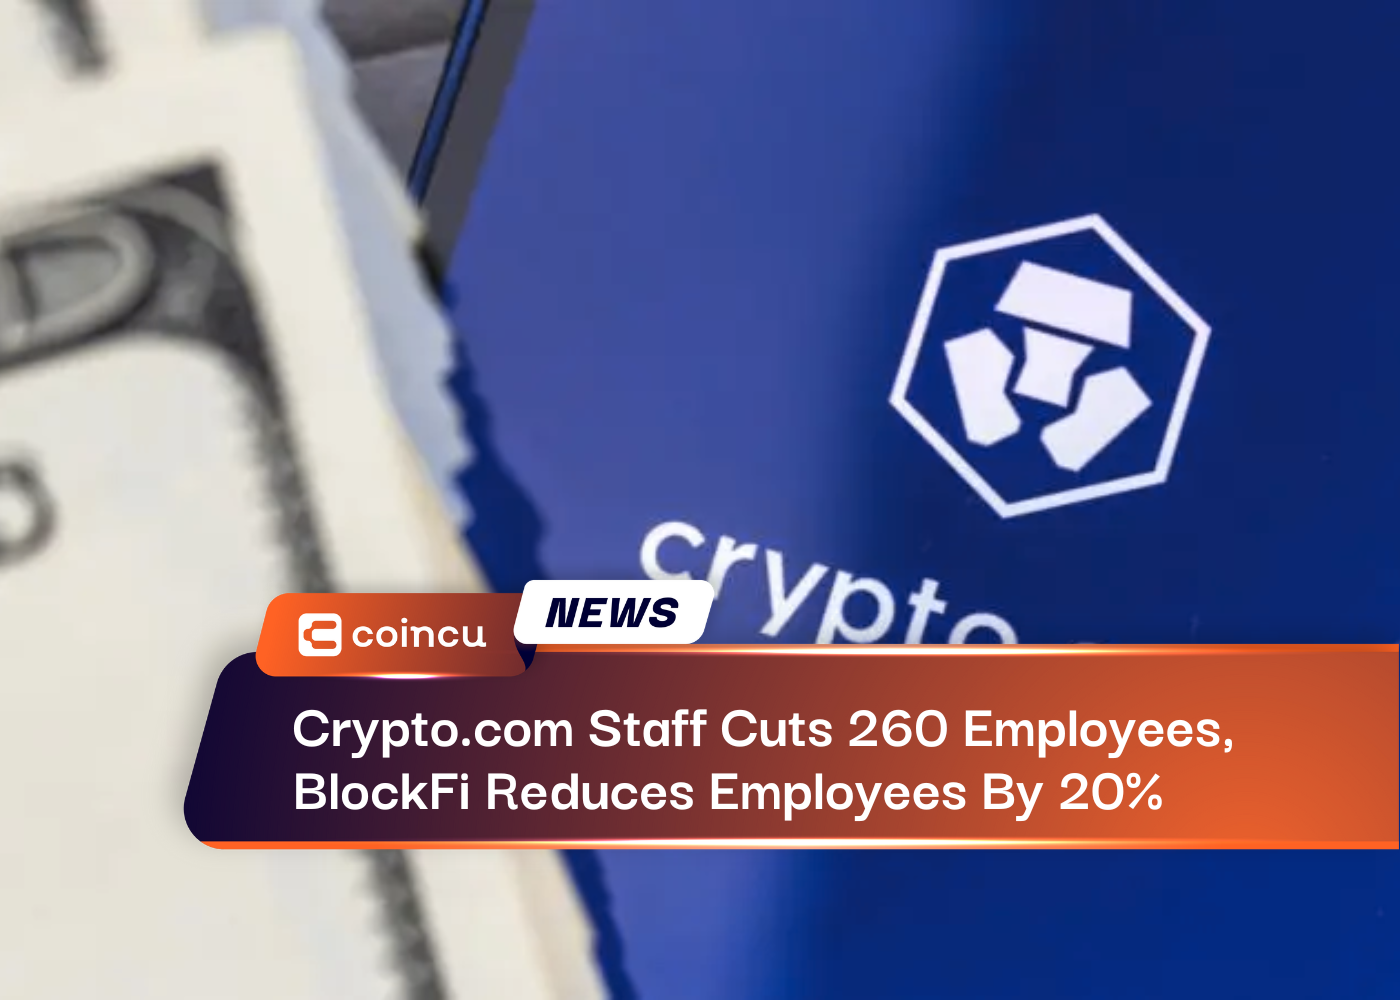 Crypto.com Staff Cuts 260 Employees, BlockFi Reduces Employees By 20%